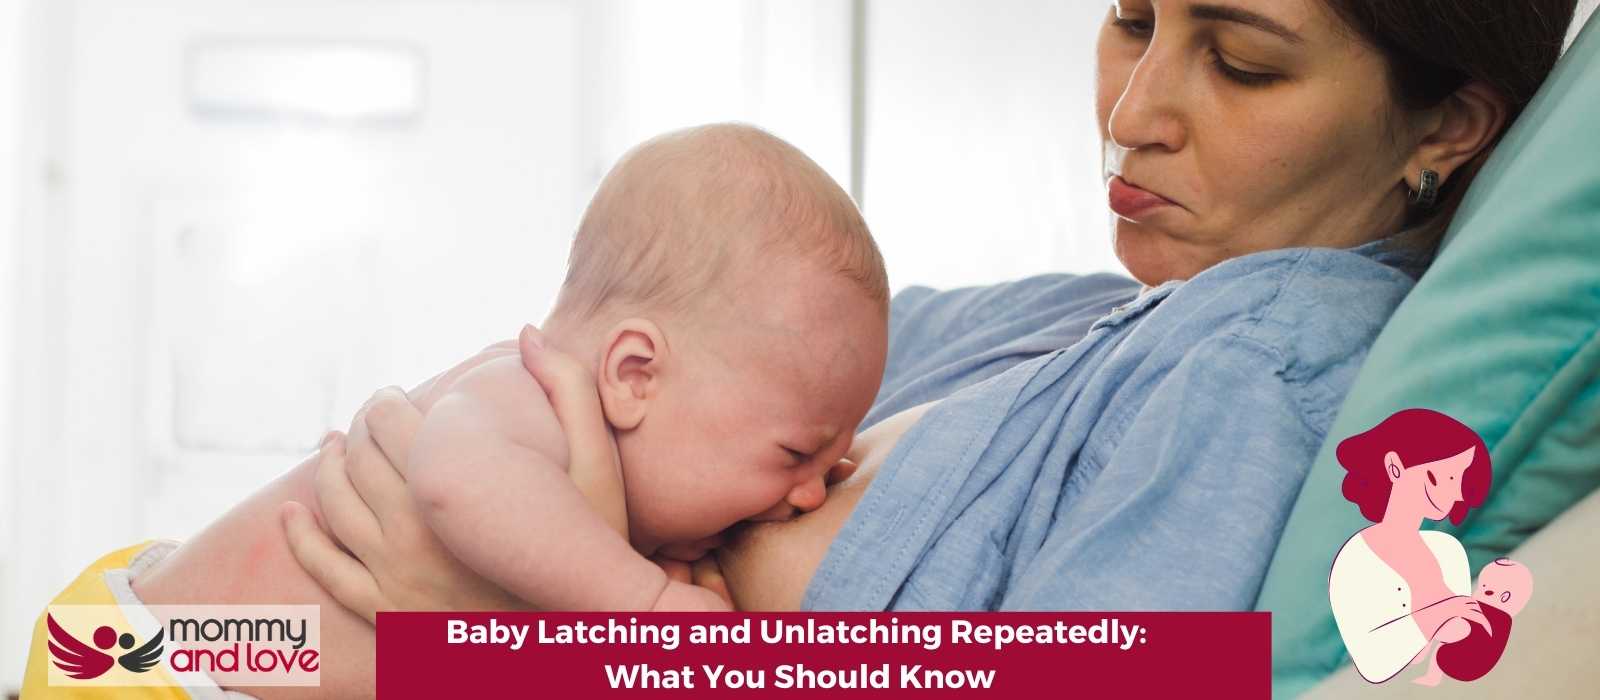 Baby Latching and Unlatching Repeatedly: What You Should Know